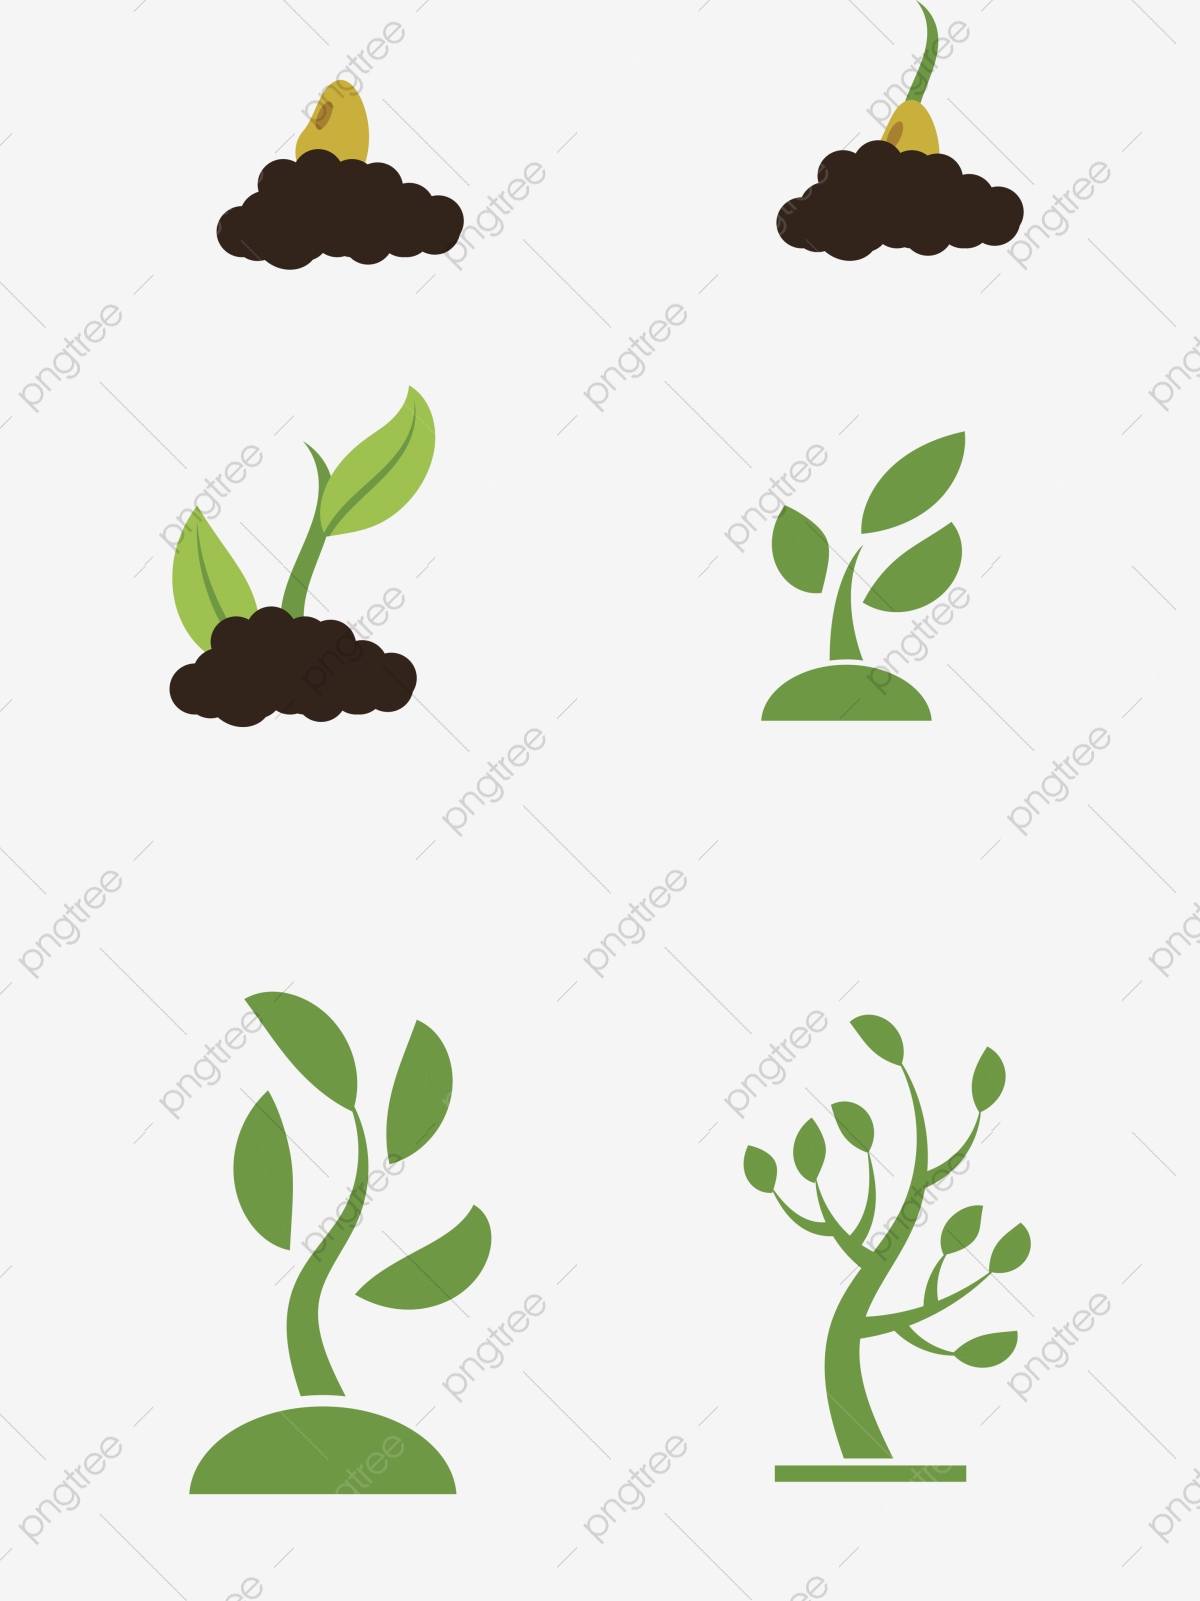 growth clipart plant care